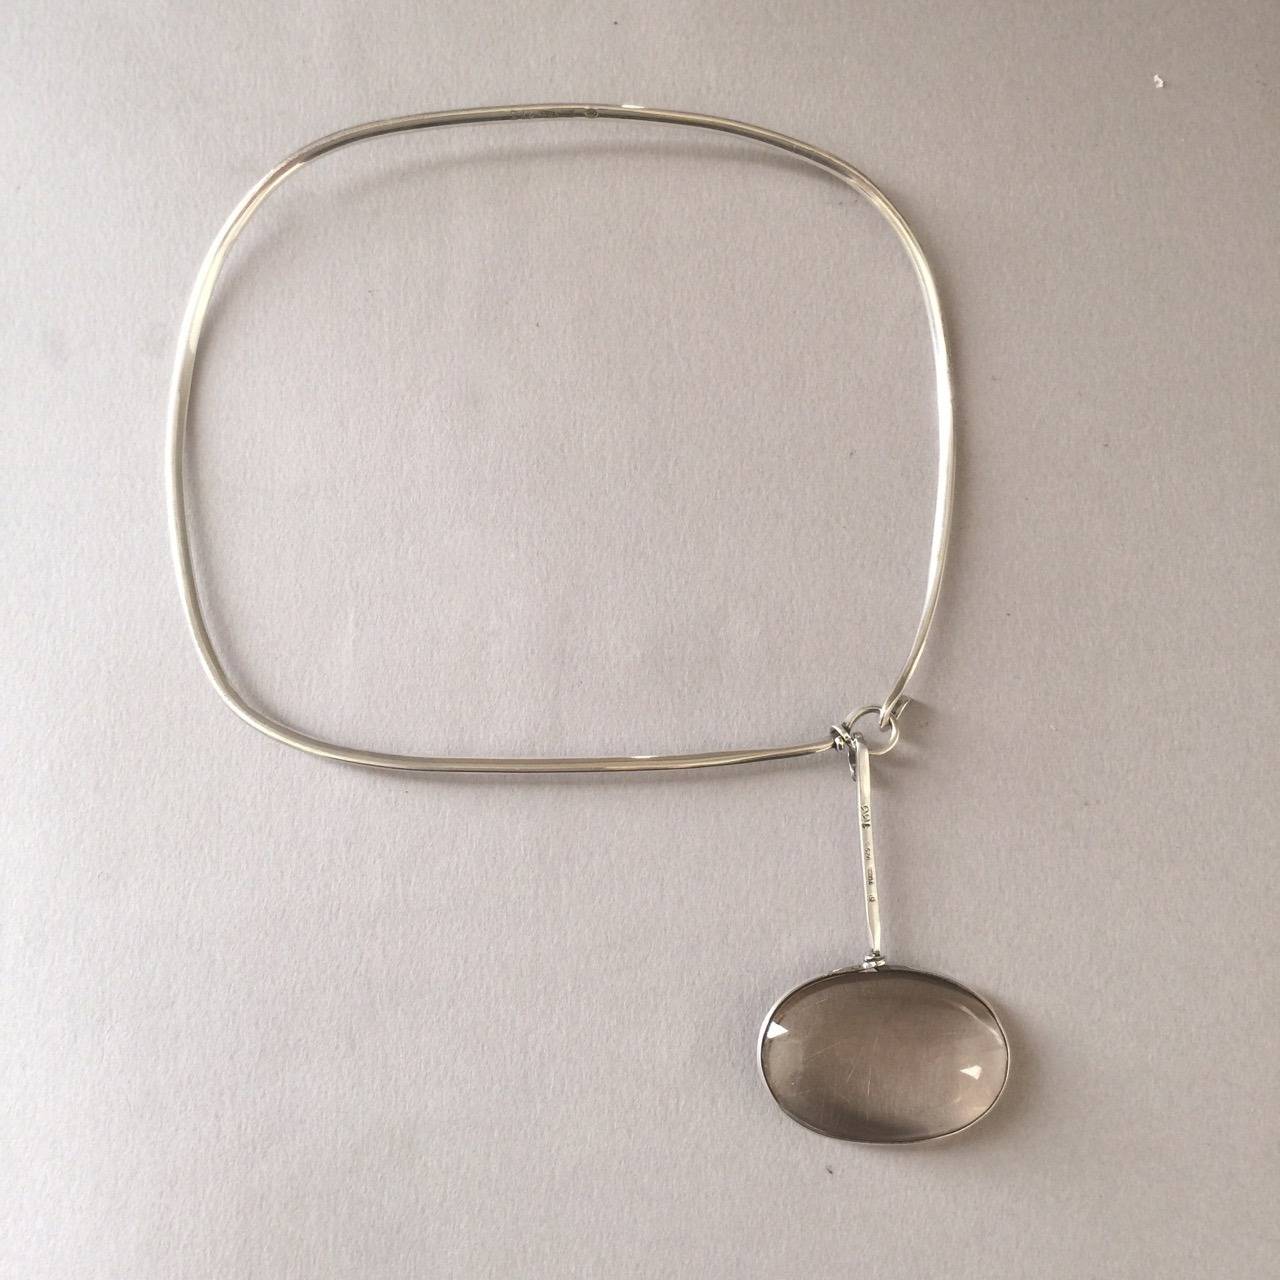 Georg Jensen Neck Ring No. 133 With Rutilated Quartz Drop No. 173 By Vivianna Torun.

Torun's classic innovative design and sculptural form are highlighted in a unique square neck ring and off centered drop. Circa 1970. Sterling silver.

6